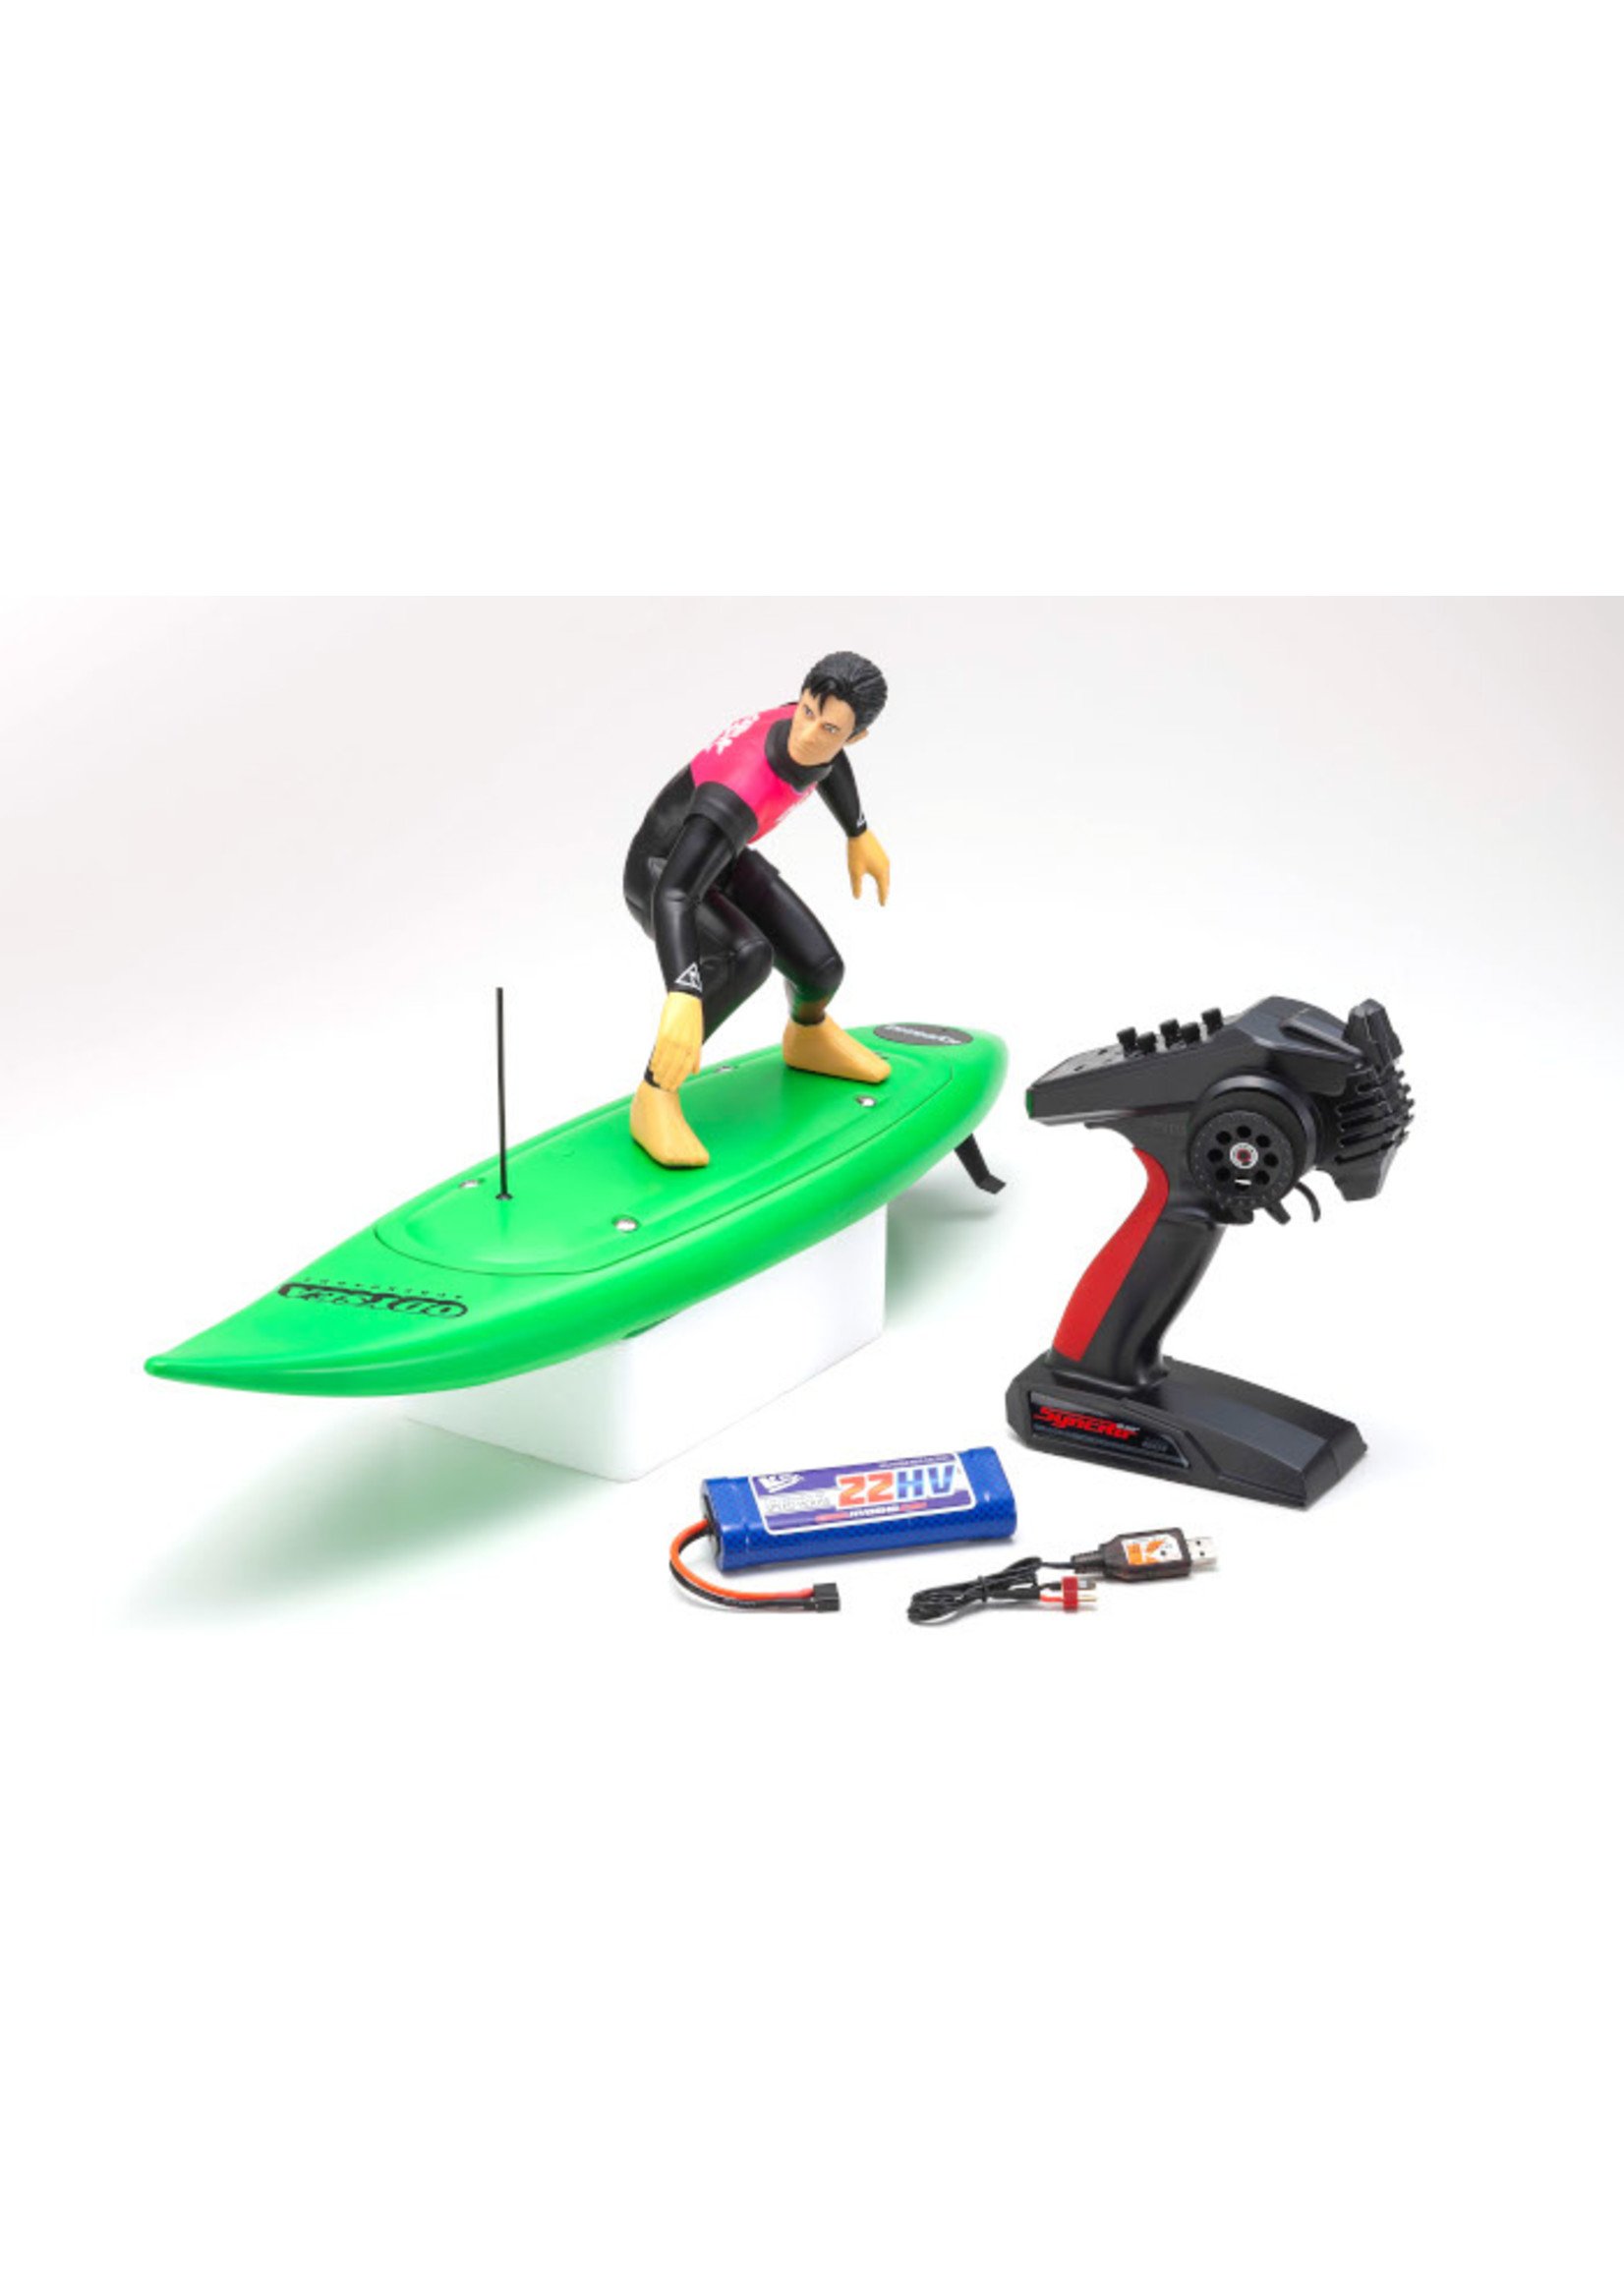 Kyosho 40110T3 - RC Surfer4 Catch Surf - Readyset